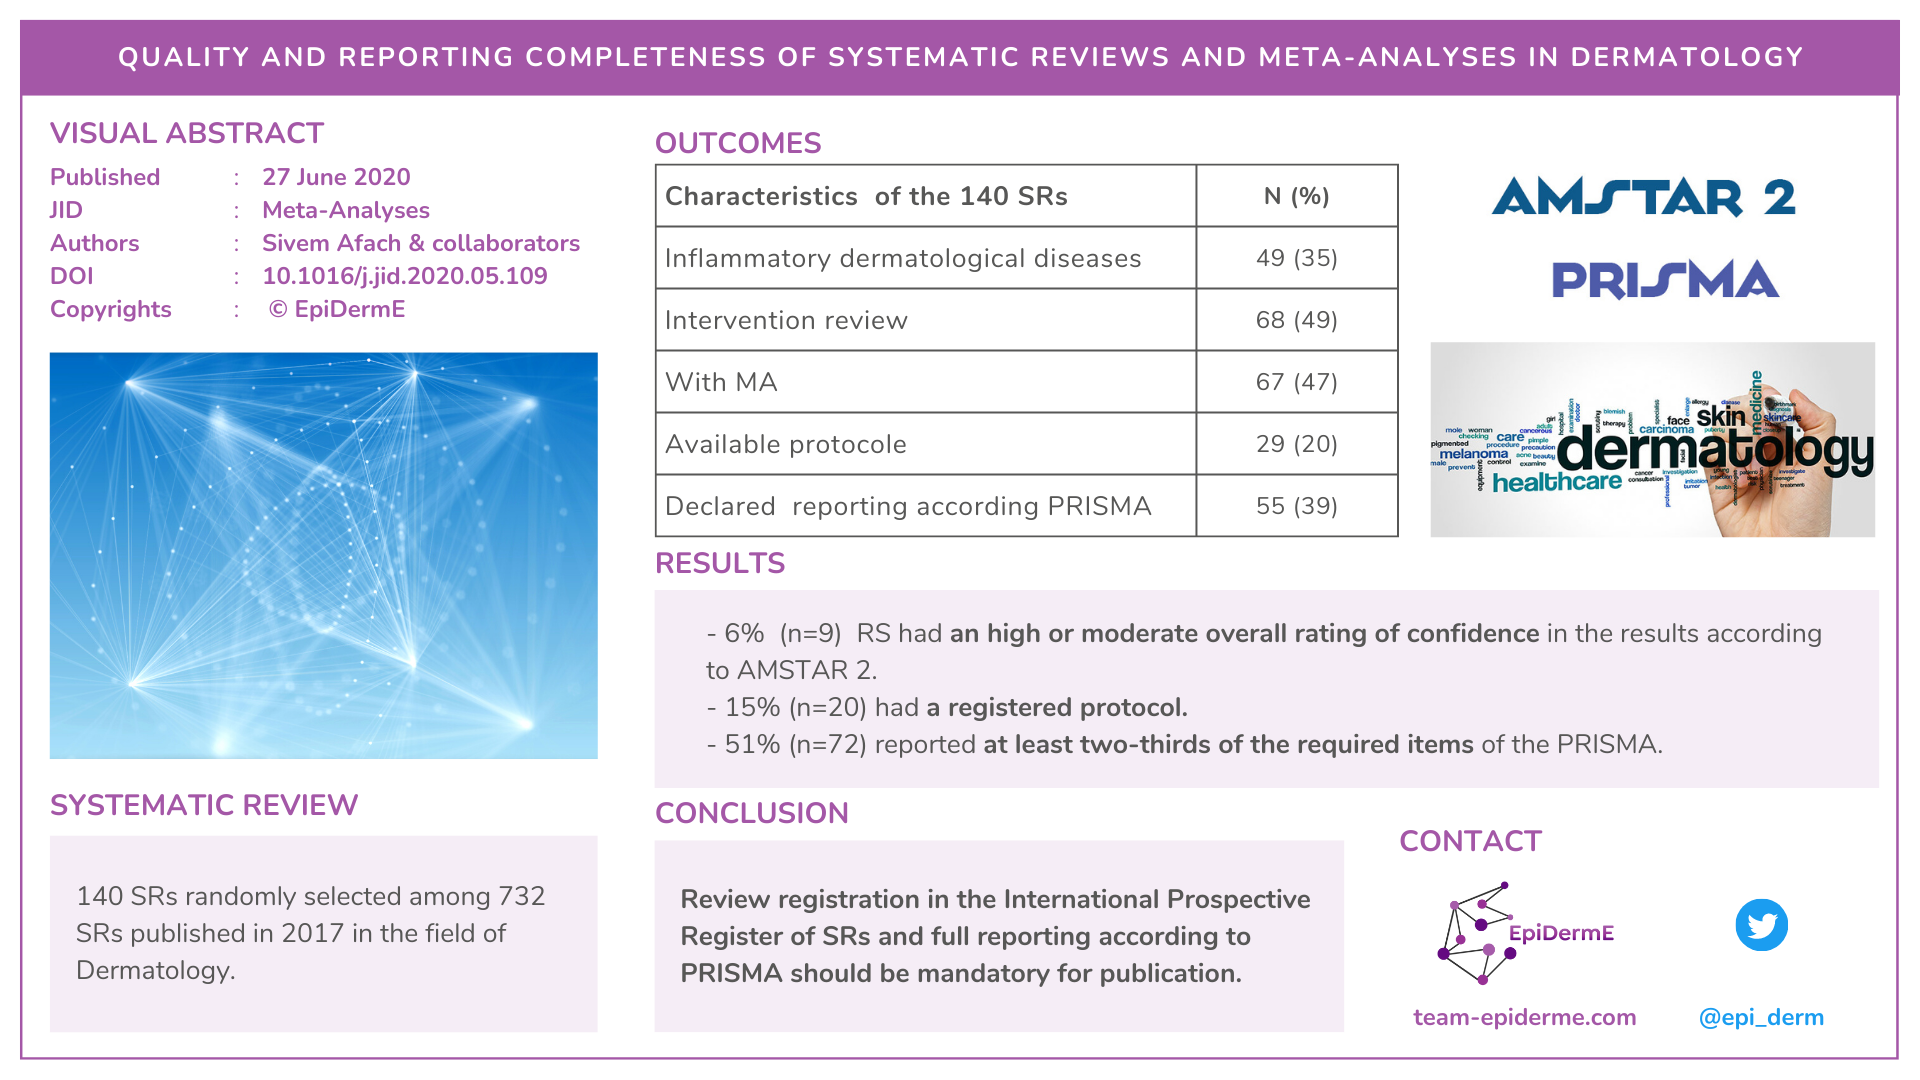 Quality and Reporting Completeness of Systematic Reviews and Meta-Analyses in Dermatology